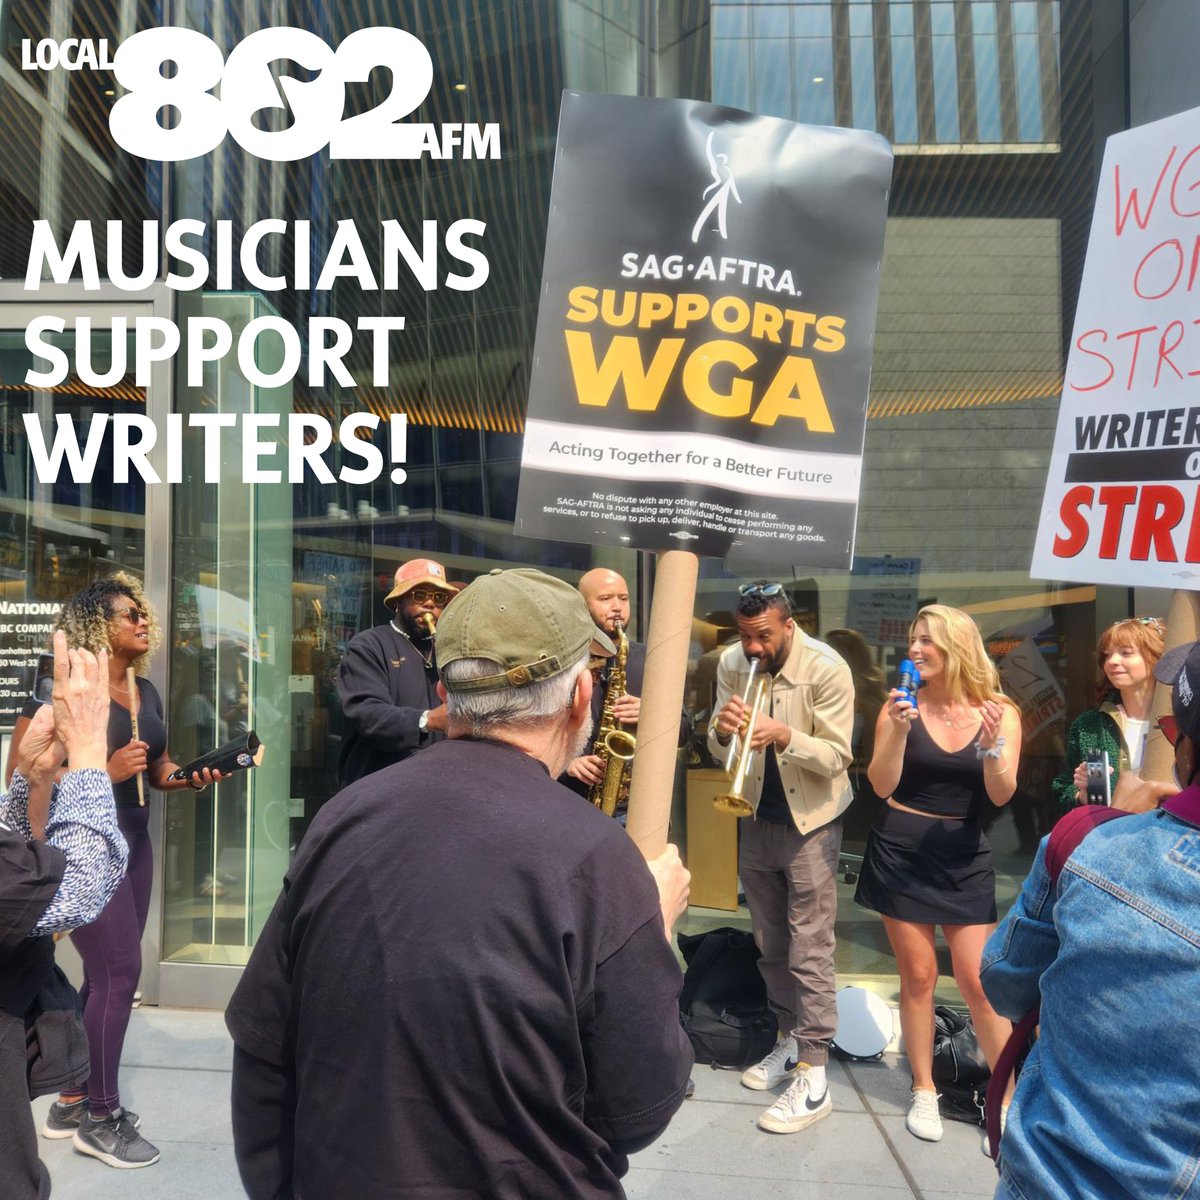 RT@The_AFM RT @Local_802_AFM: MUSICIANS SUPPORT WRITERS! Local 802 musicians from the @colbertlateshow marched & played in support of writers on strike for a fair contract. See today’s picket schedule at @WGAEast. SOLIDARITY!
@The_AFM
@CentralLaborNYC
@f…